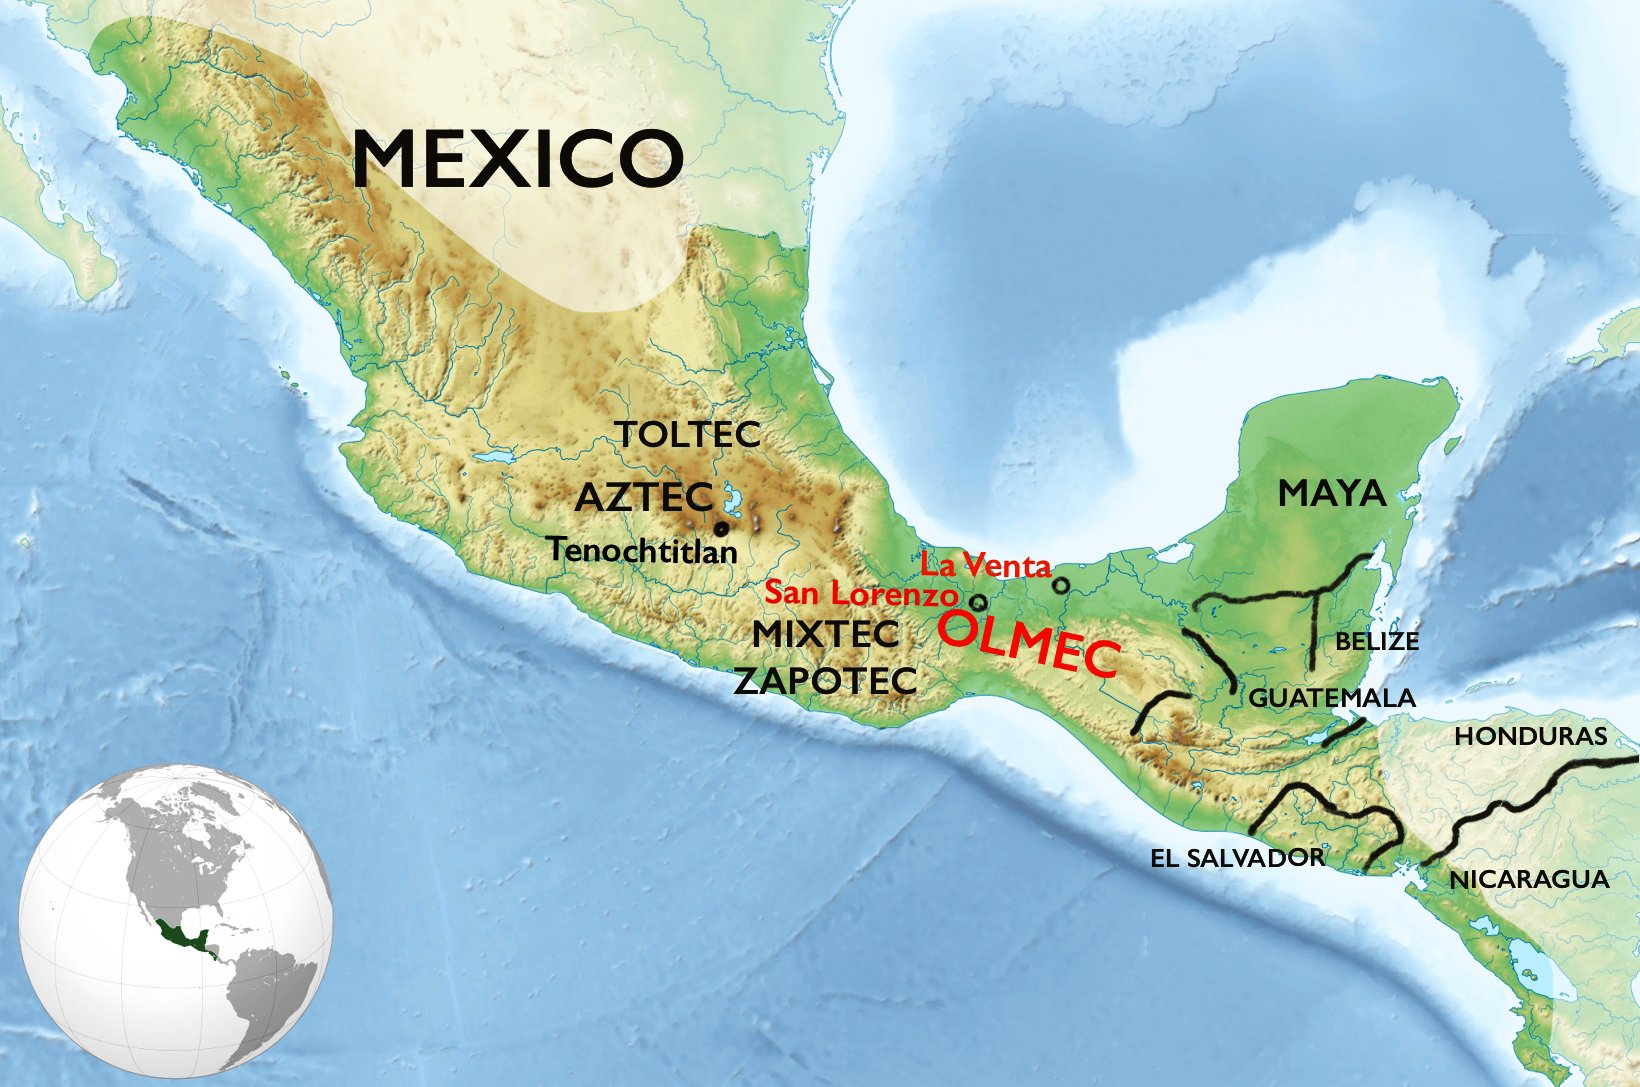 A map of Mexico and Central America showing the locations of Aztec, Mixtec Zapotec, Olmec and Mayan Civilizations and cities. The map has a blue and green color scheme and a small inset globe in the bottom left corner.